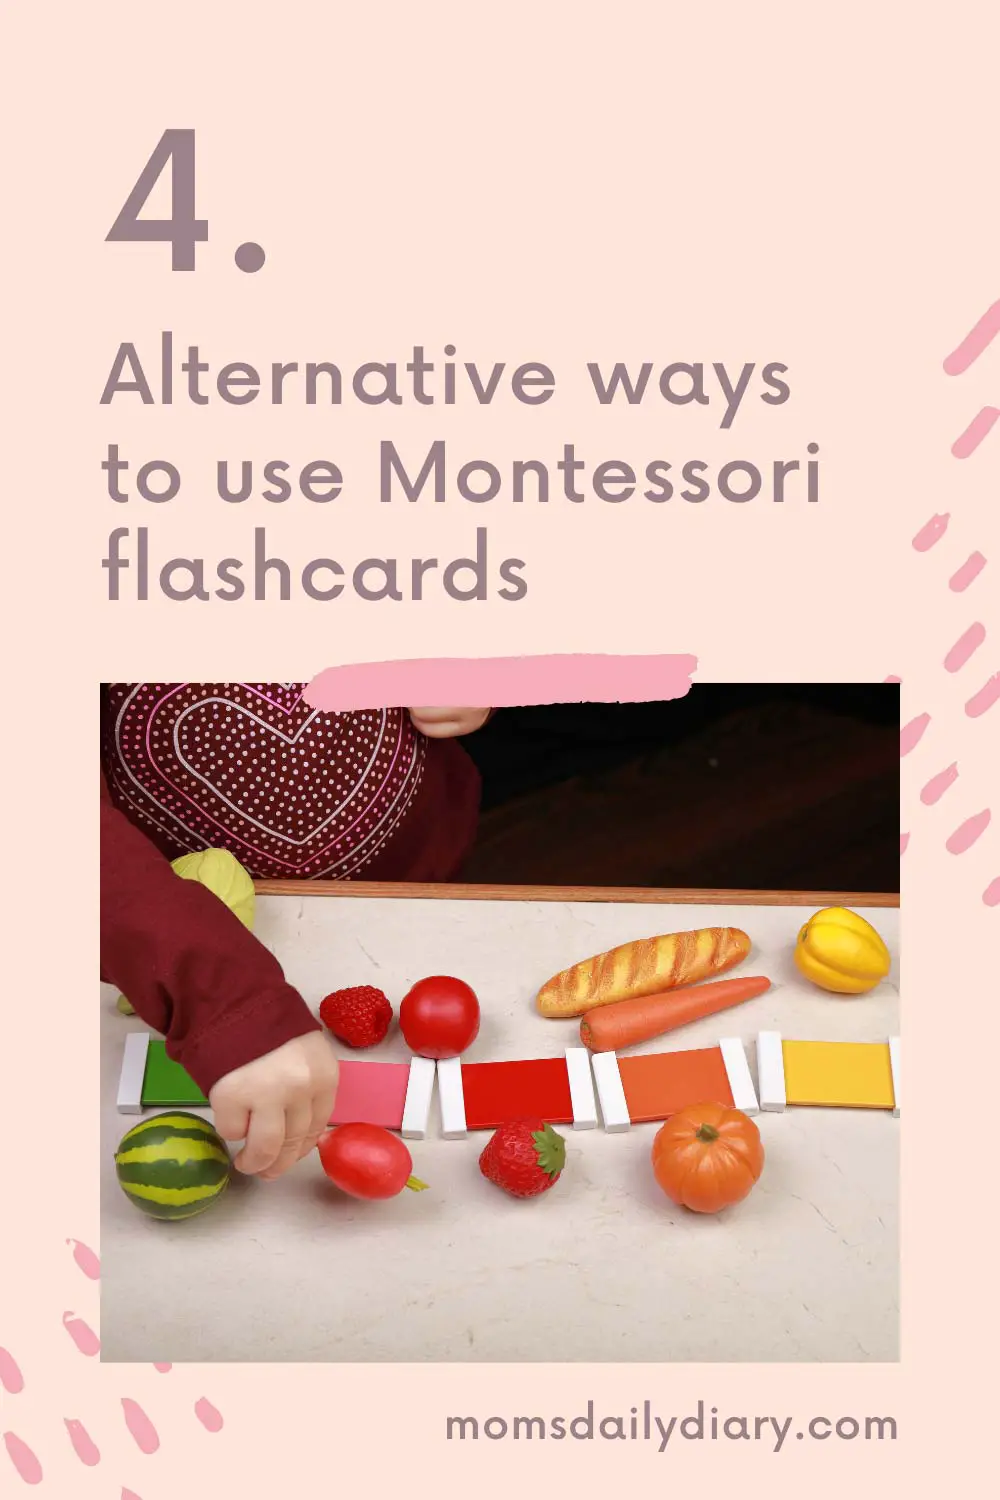 Montessori flashcards are a great way to improve your toddler's language skills. Here are 4 ways to make them even more engaging.